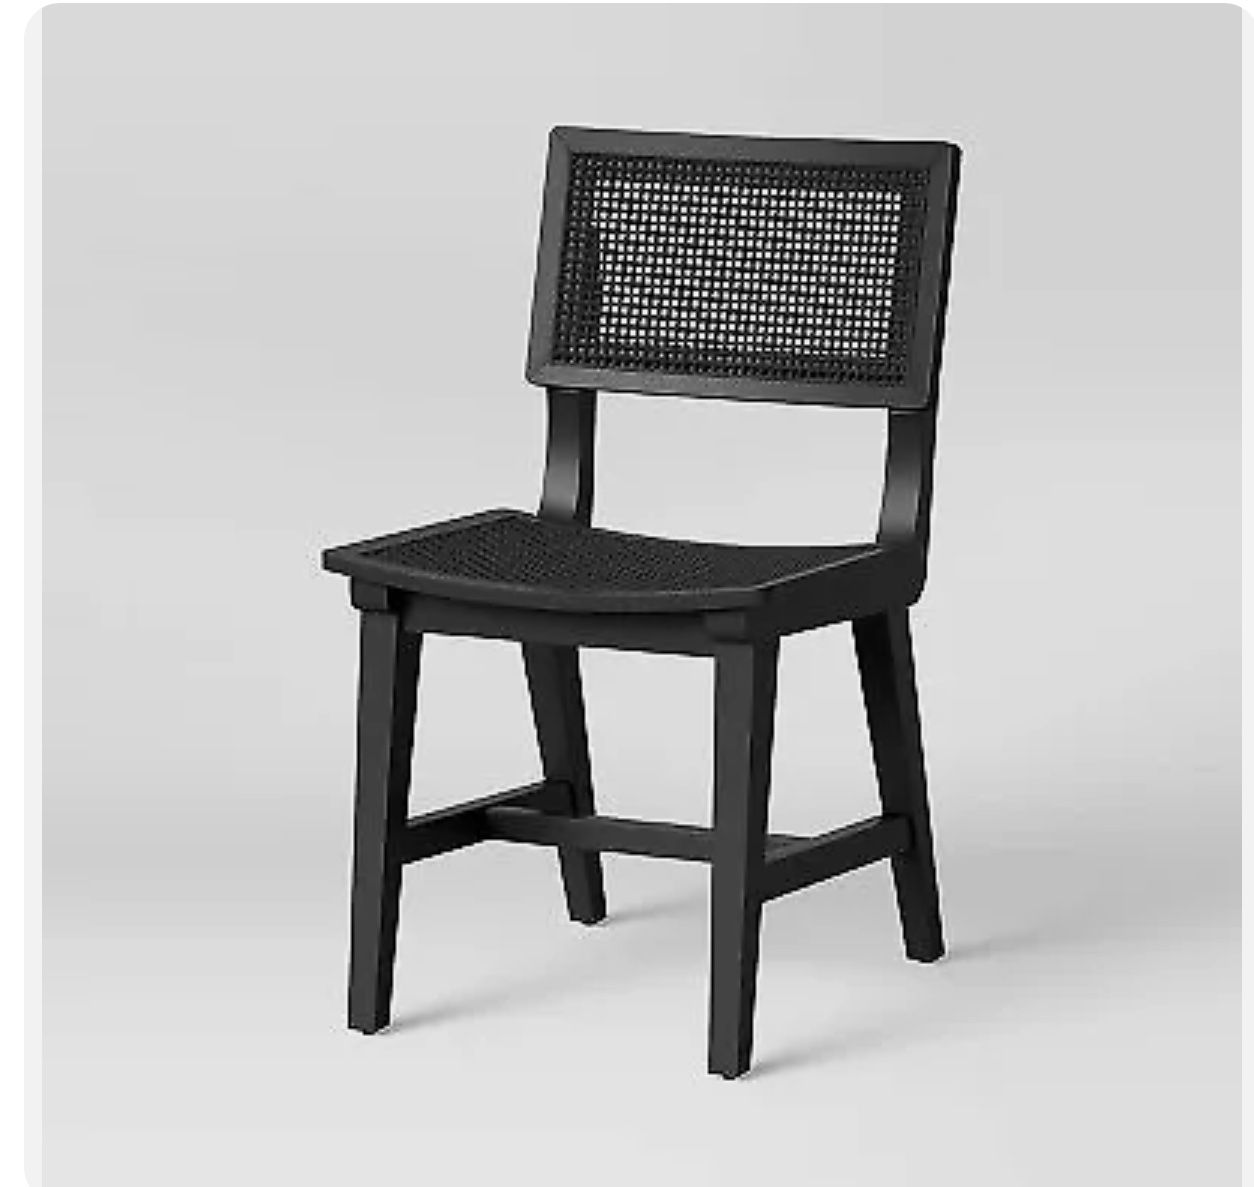 Tormod Backed Cane Dining Chair Black - Project 62